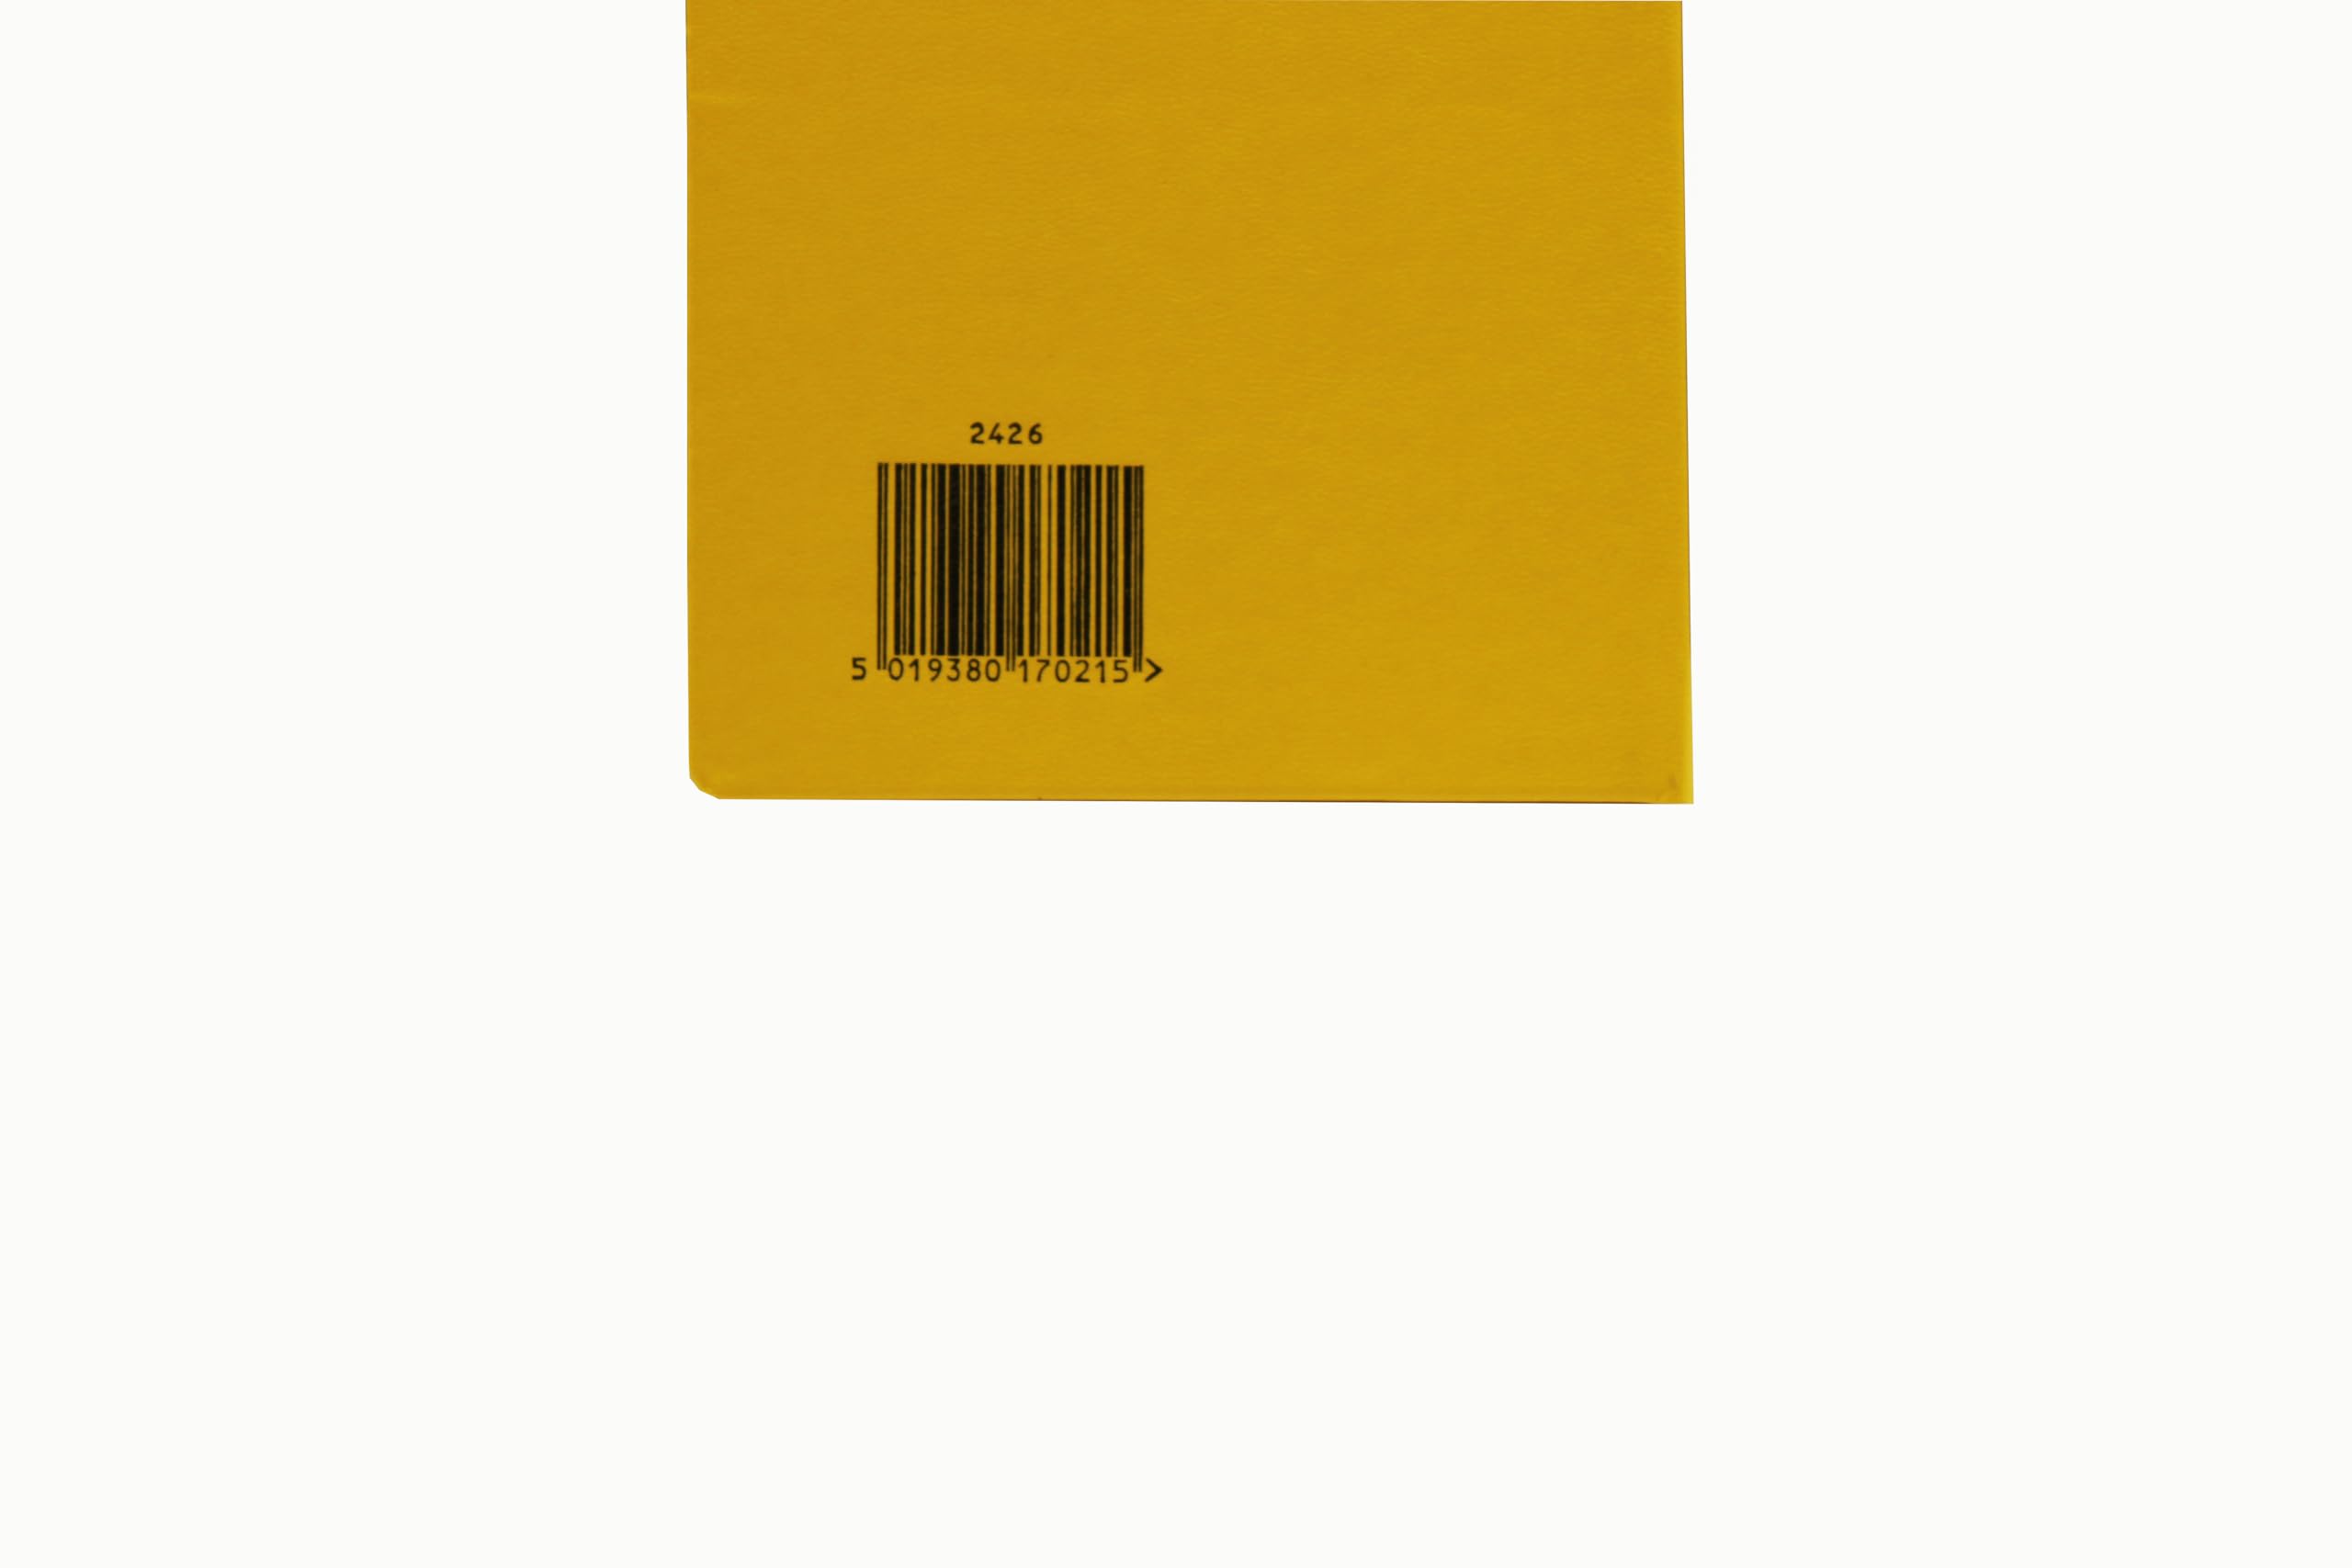 Exacompta - Ref 2426Z - Chartwell Casebound Level Survey Book - 192 x 120mm in Size, Excellent Strength When Wet, Ideal for Use Outside, Pre-Printed Pages, Yellow